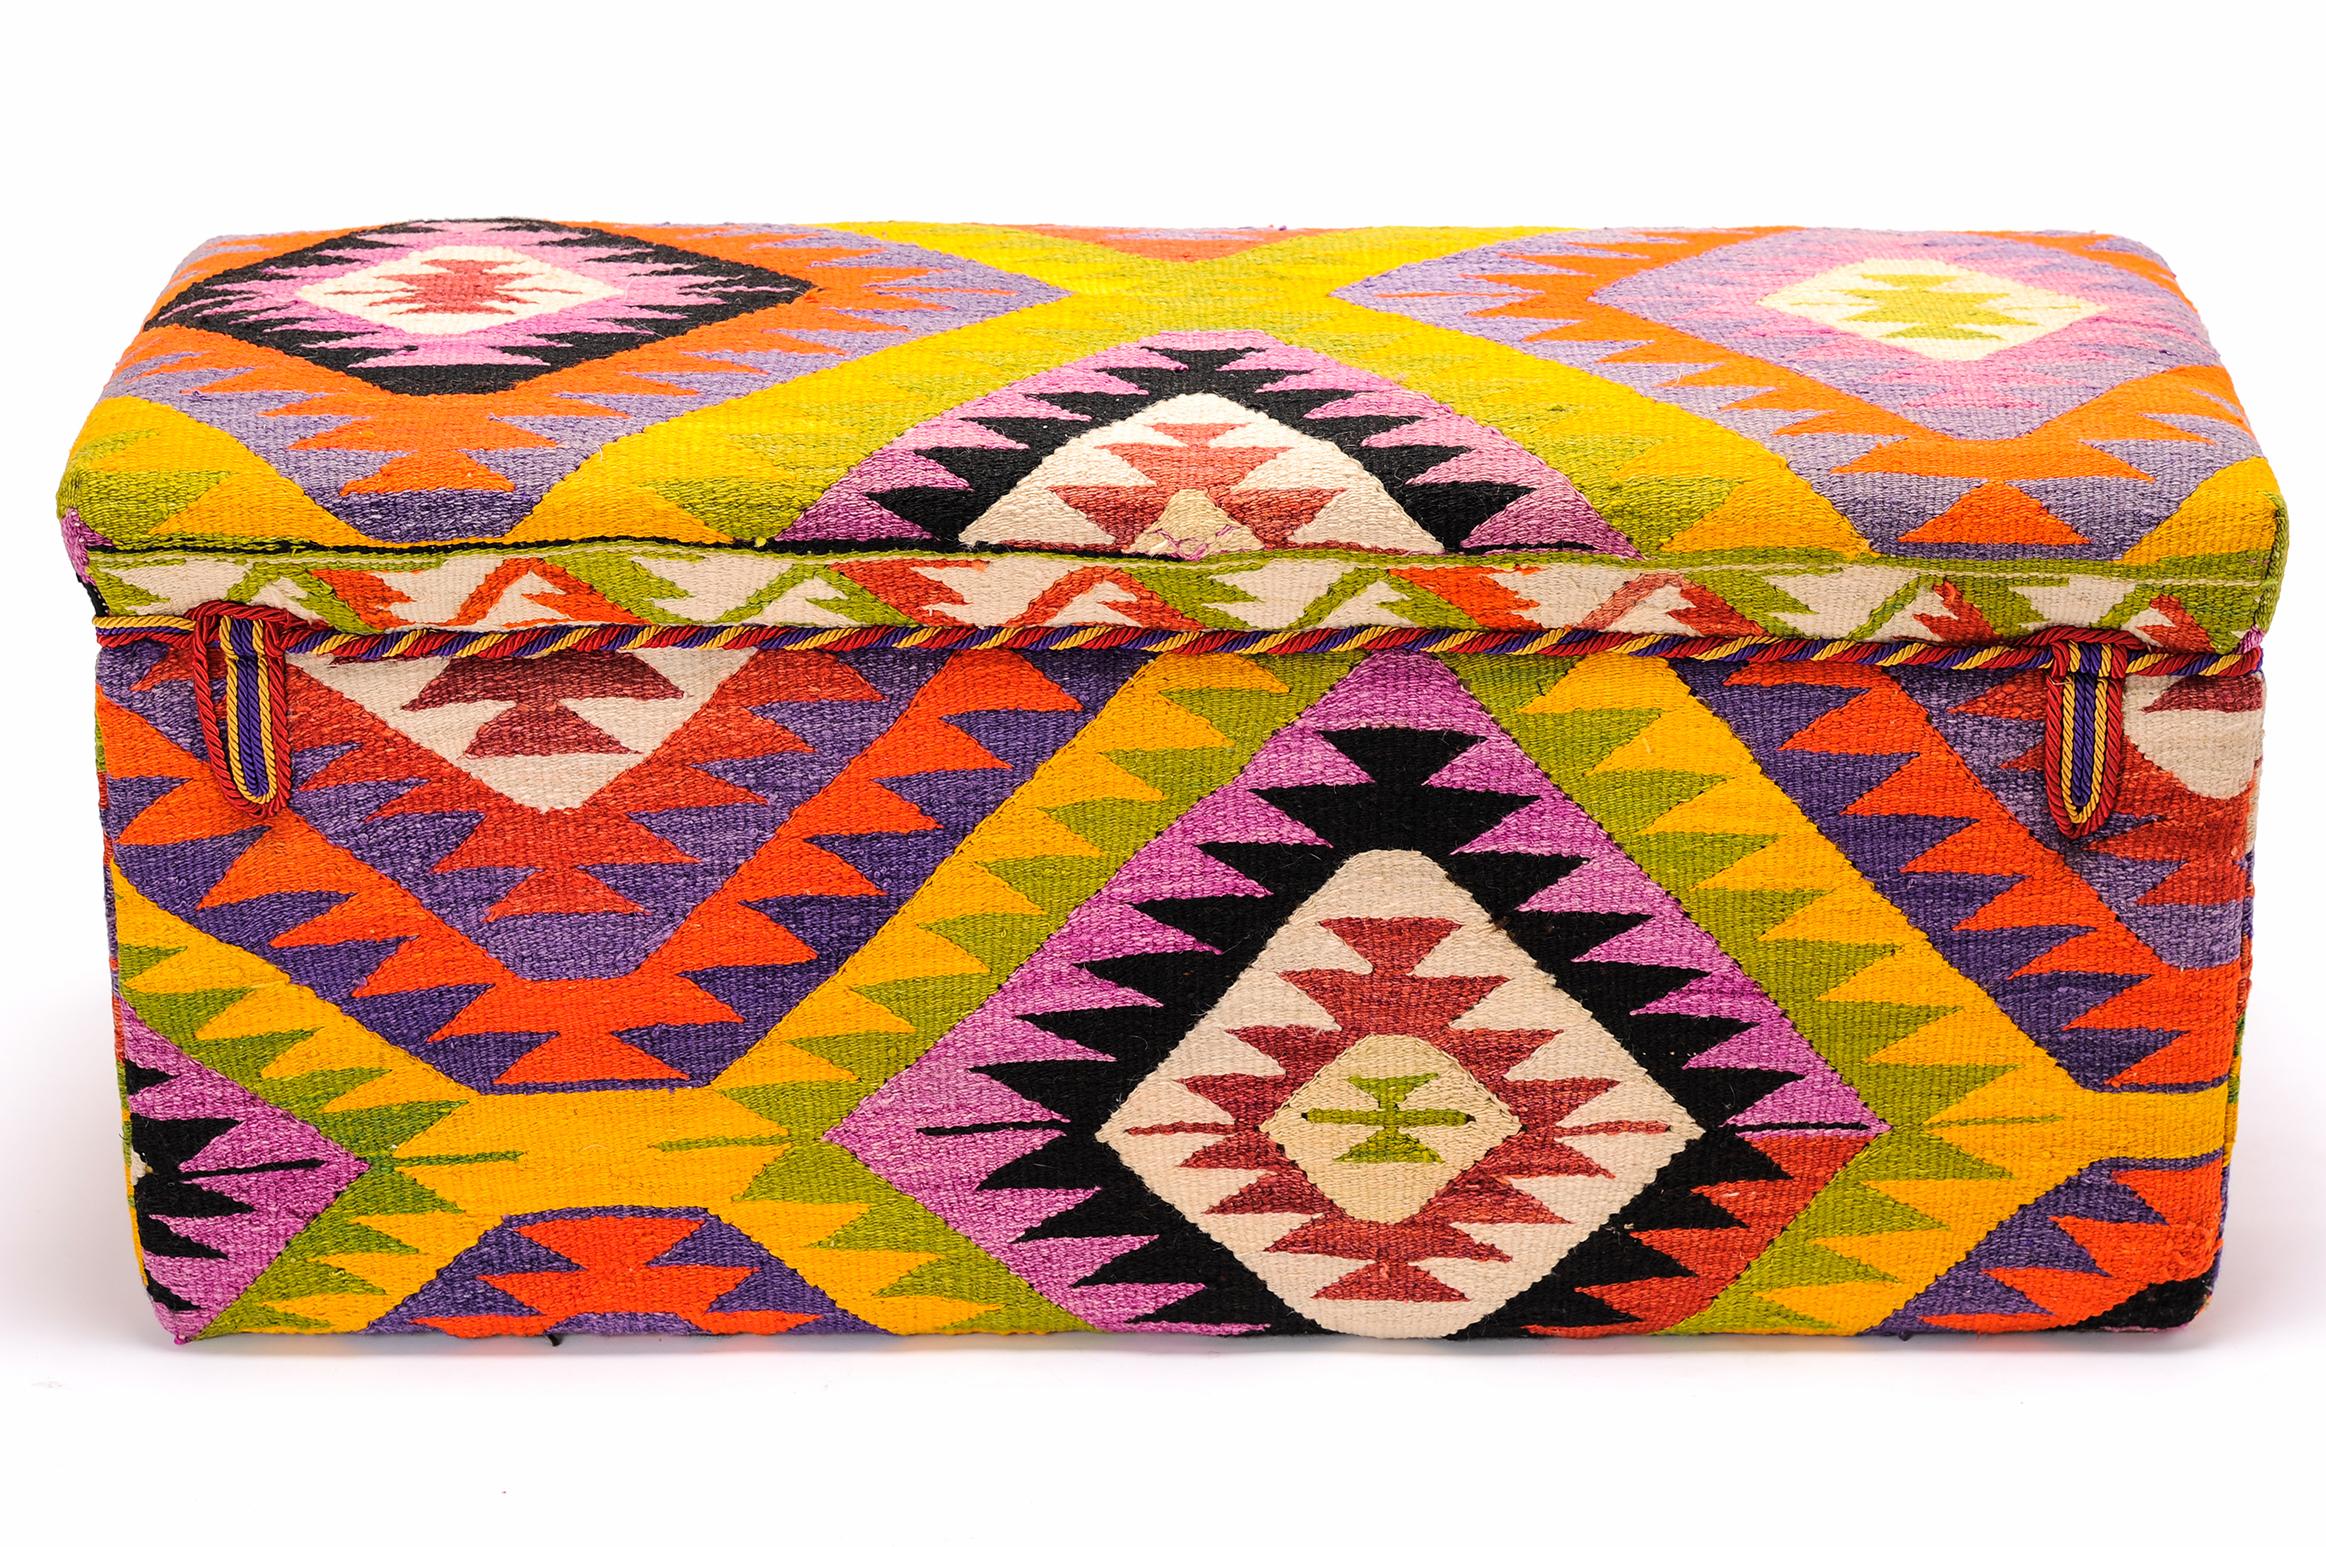 Wool Kilim Upholstered Bench or Pouf with Modern Taste For Sale